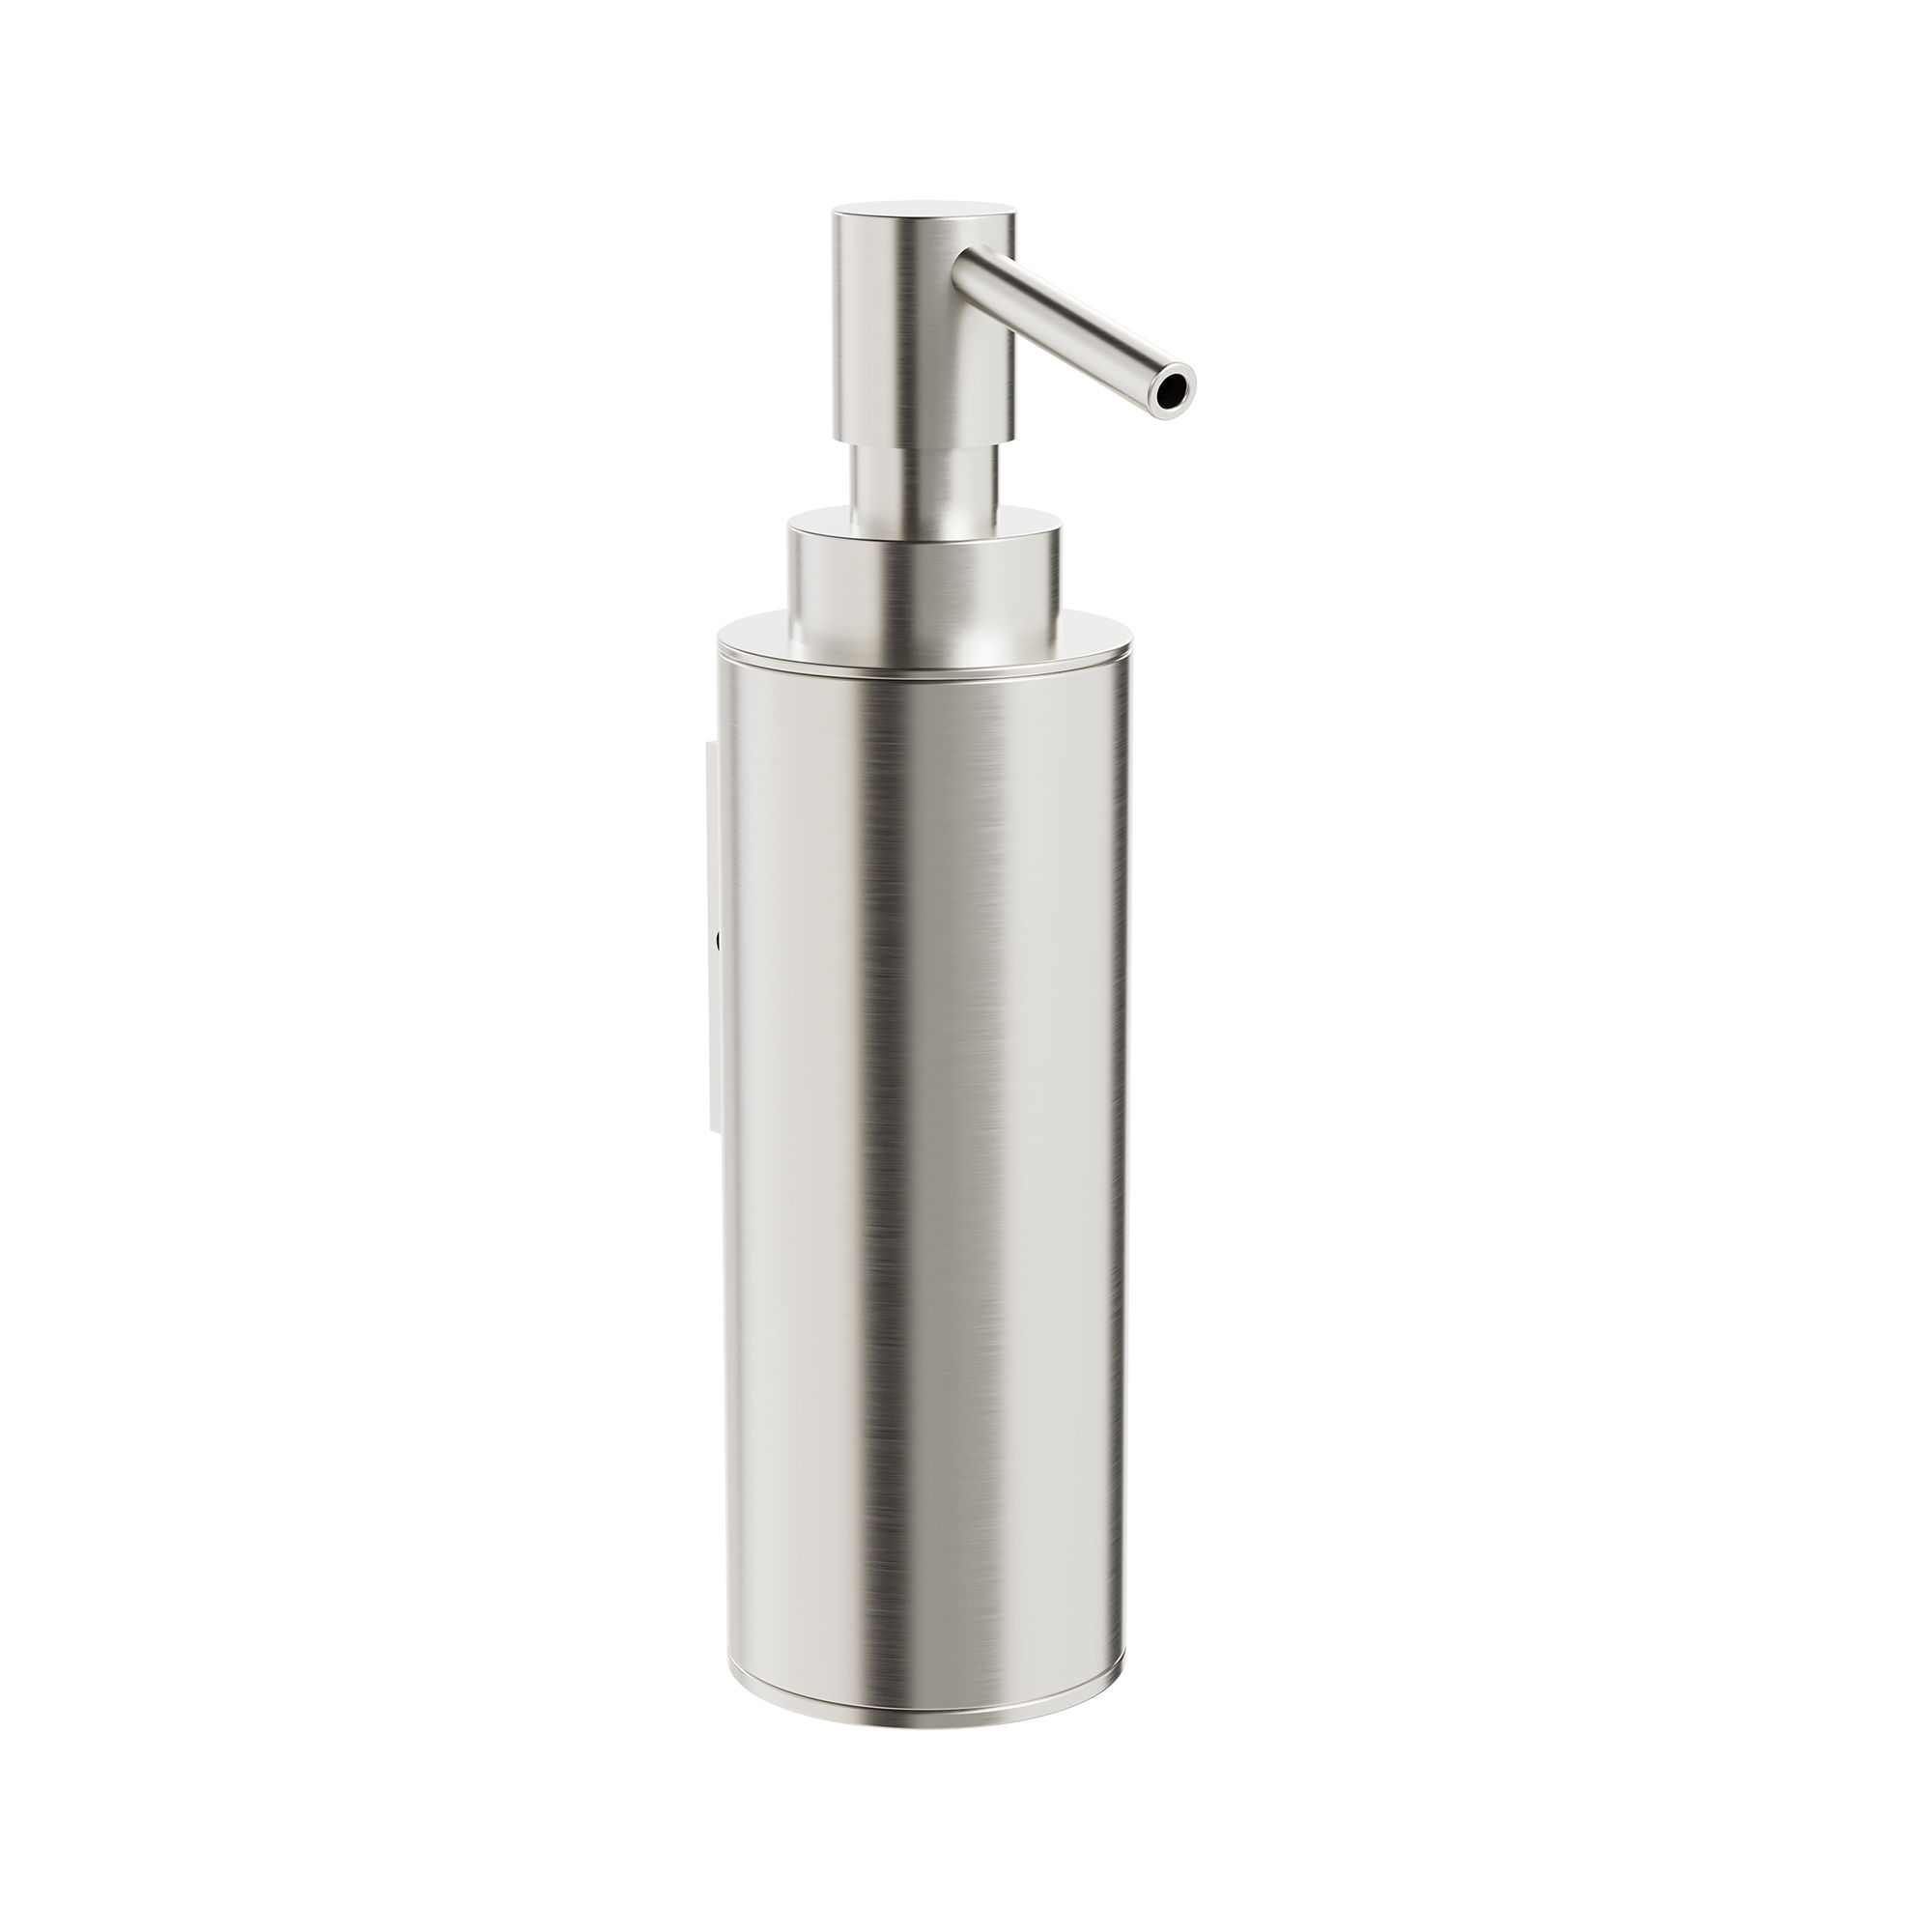  The Mio Round Wall Mounted Soap Dispenser